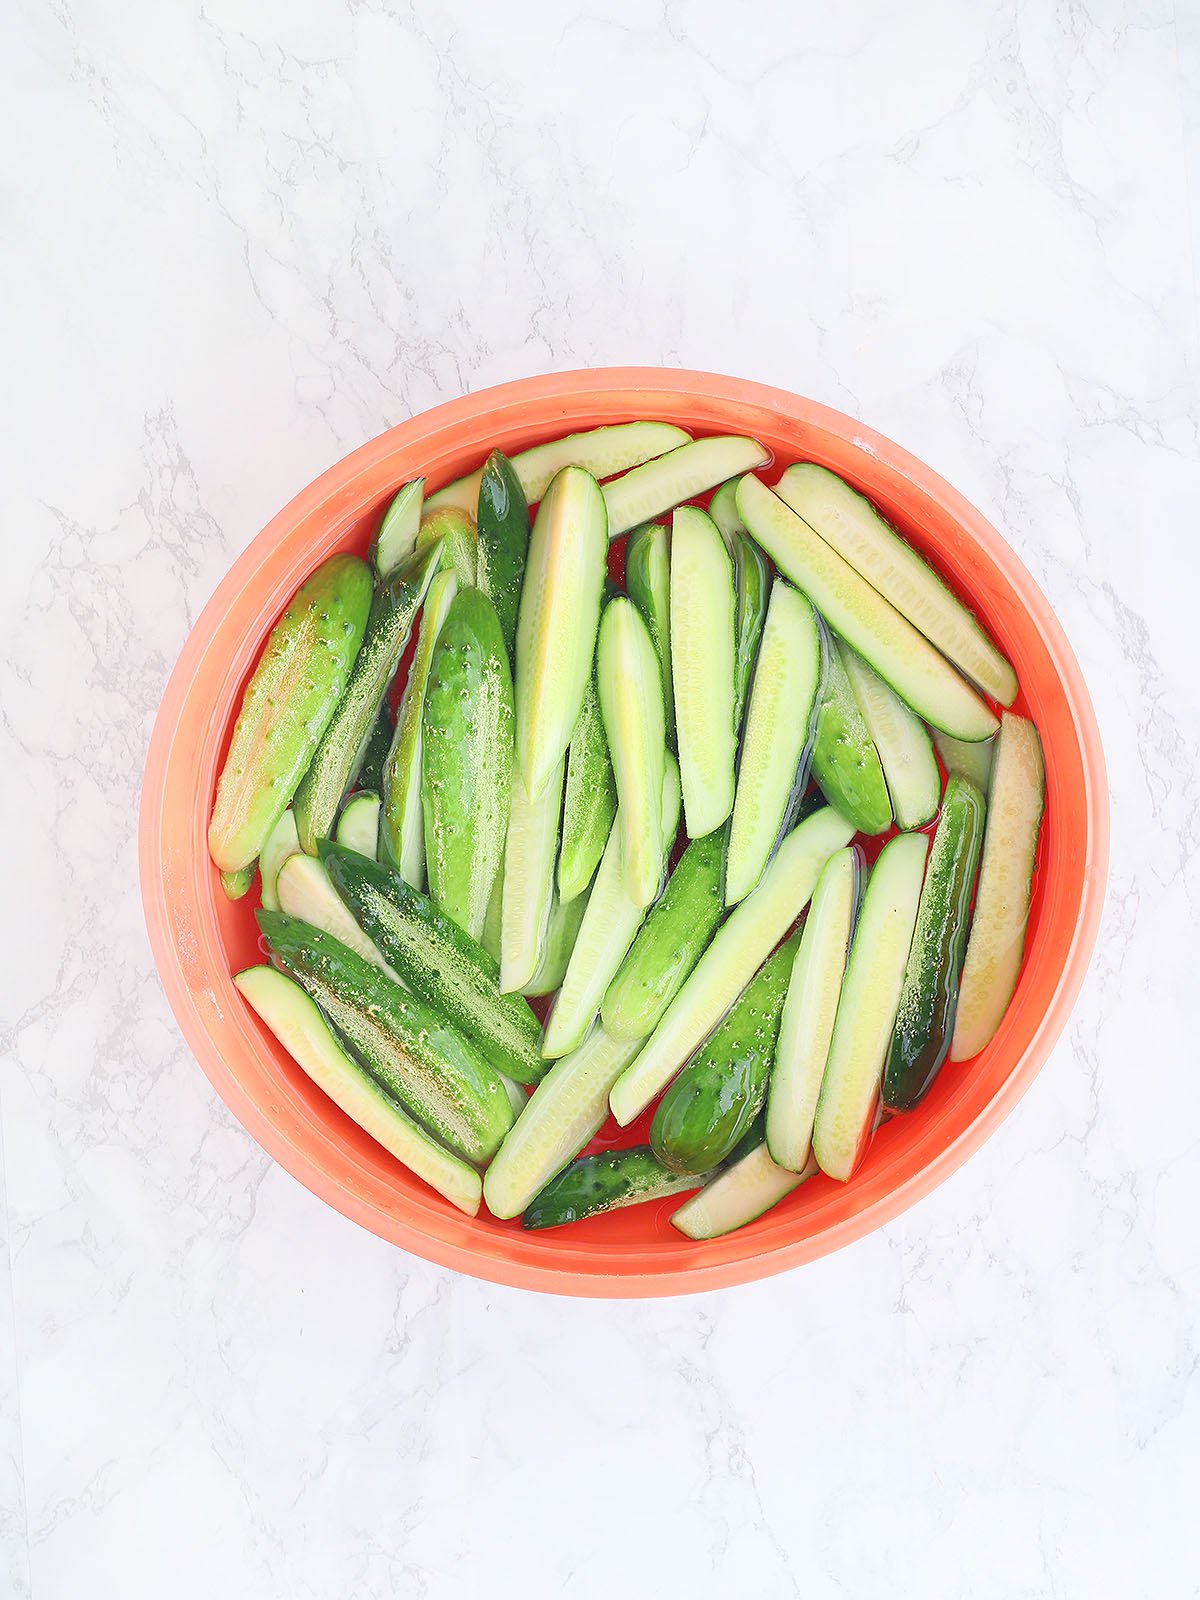 sliced cucumber spears soaking in a large bowl of salt water